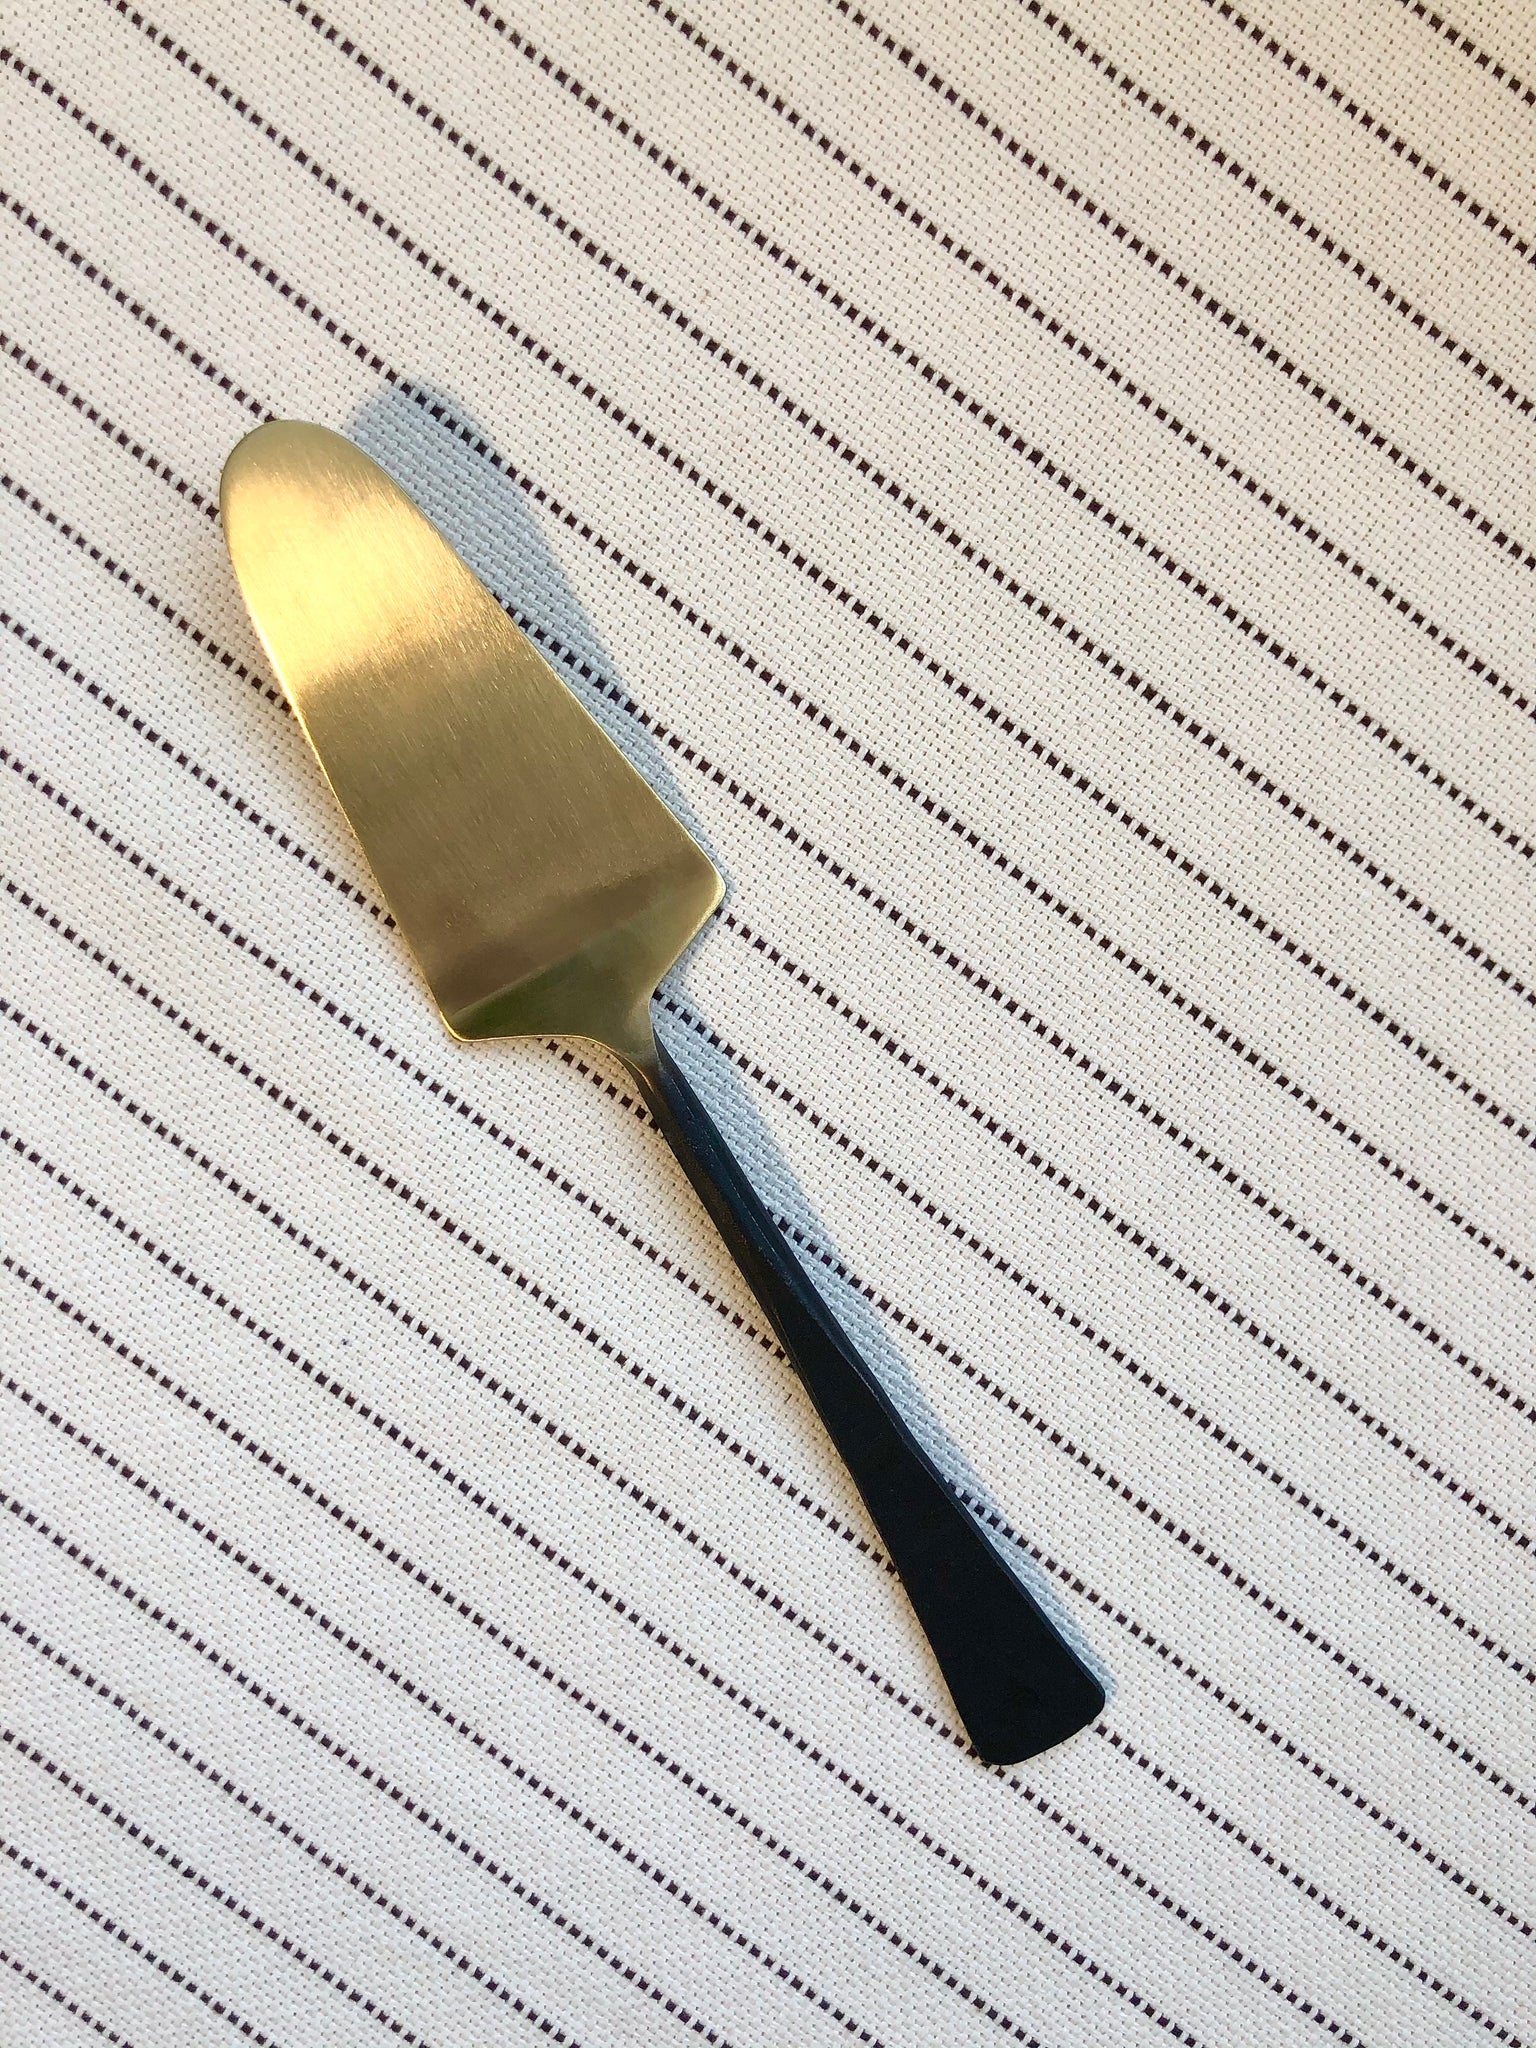 Gold Lifter with Black Handle